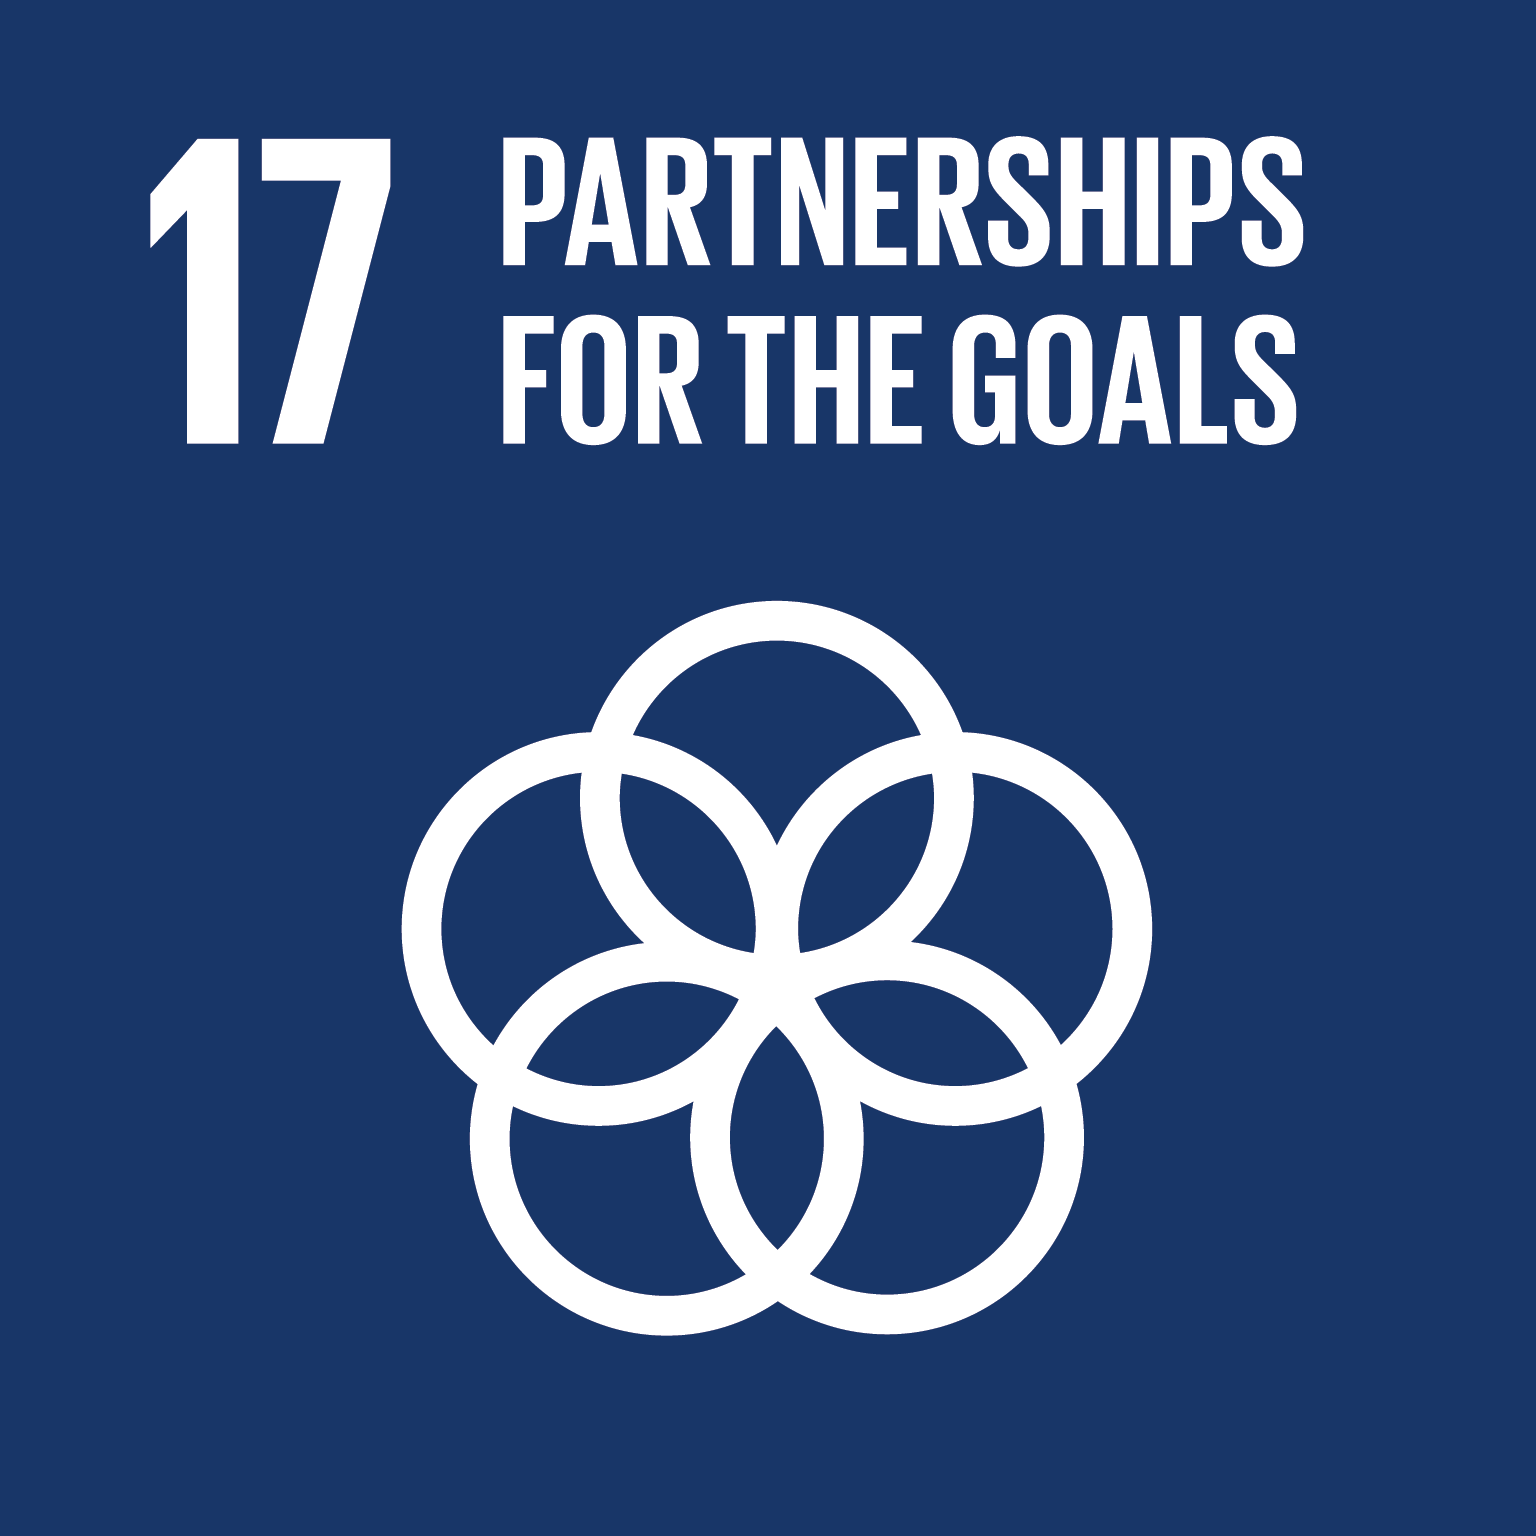 Goal 17: Partnerships for the Goals - Strengthen the means of implementation and revitalize the global partnership for sustainable development